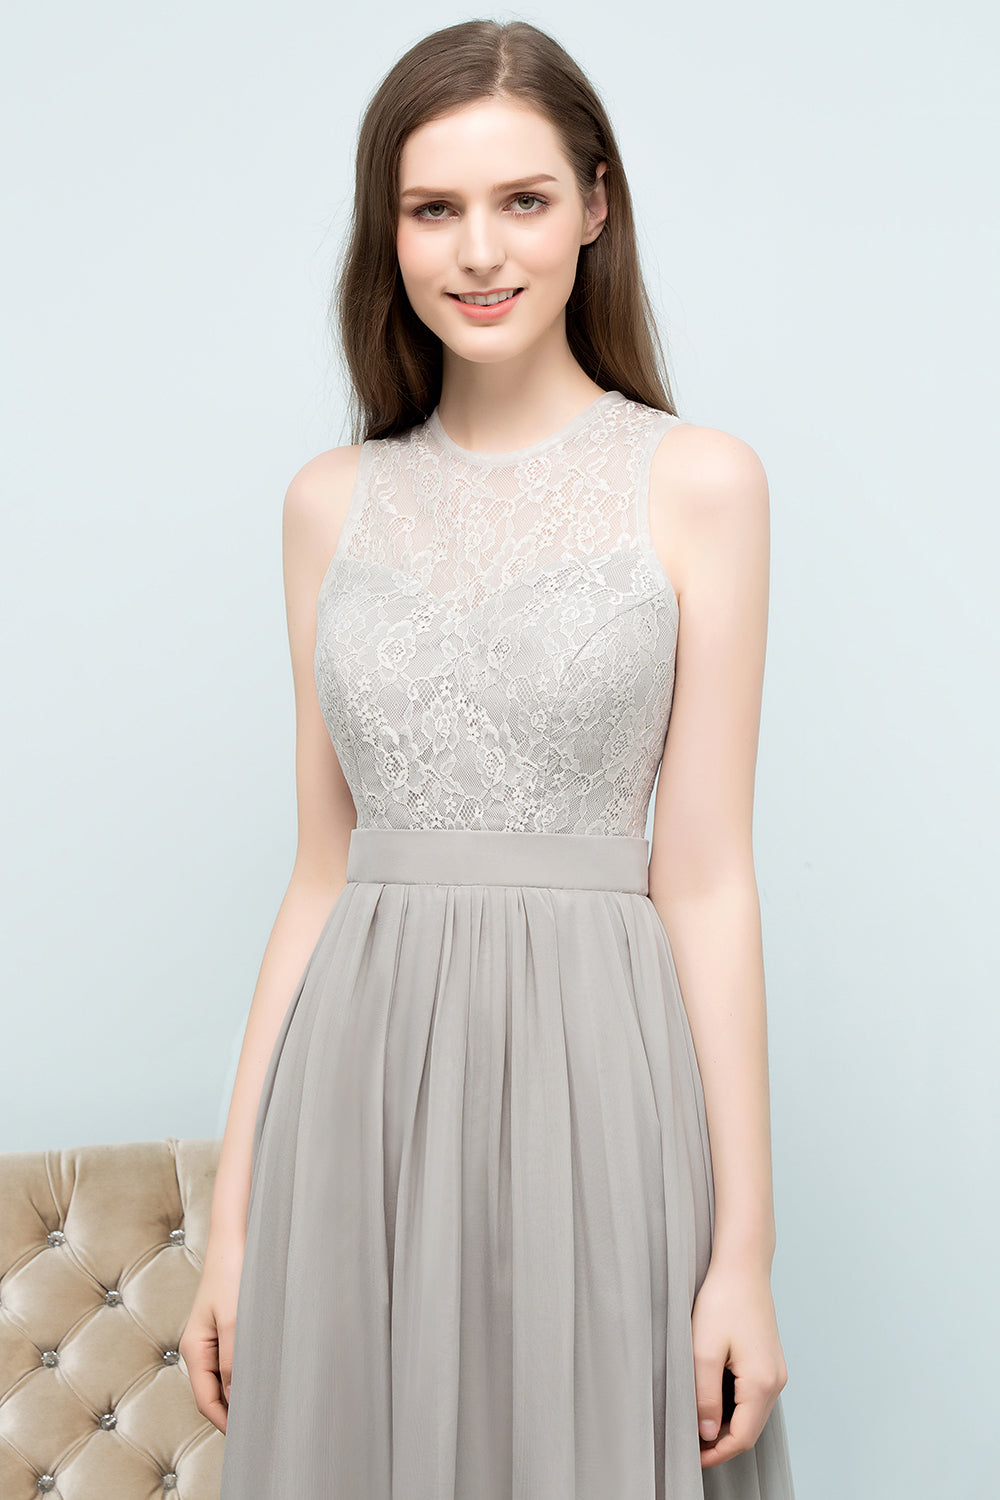 Load image into Gallery viewer, Affordable Lace Sleeveless Silver Bridesmaid Dress with Ruffles-27dress
